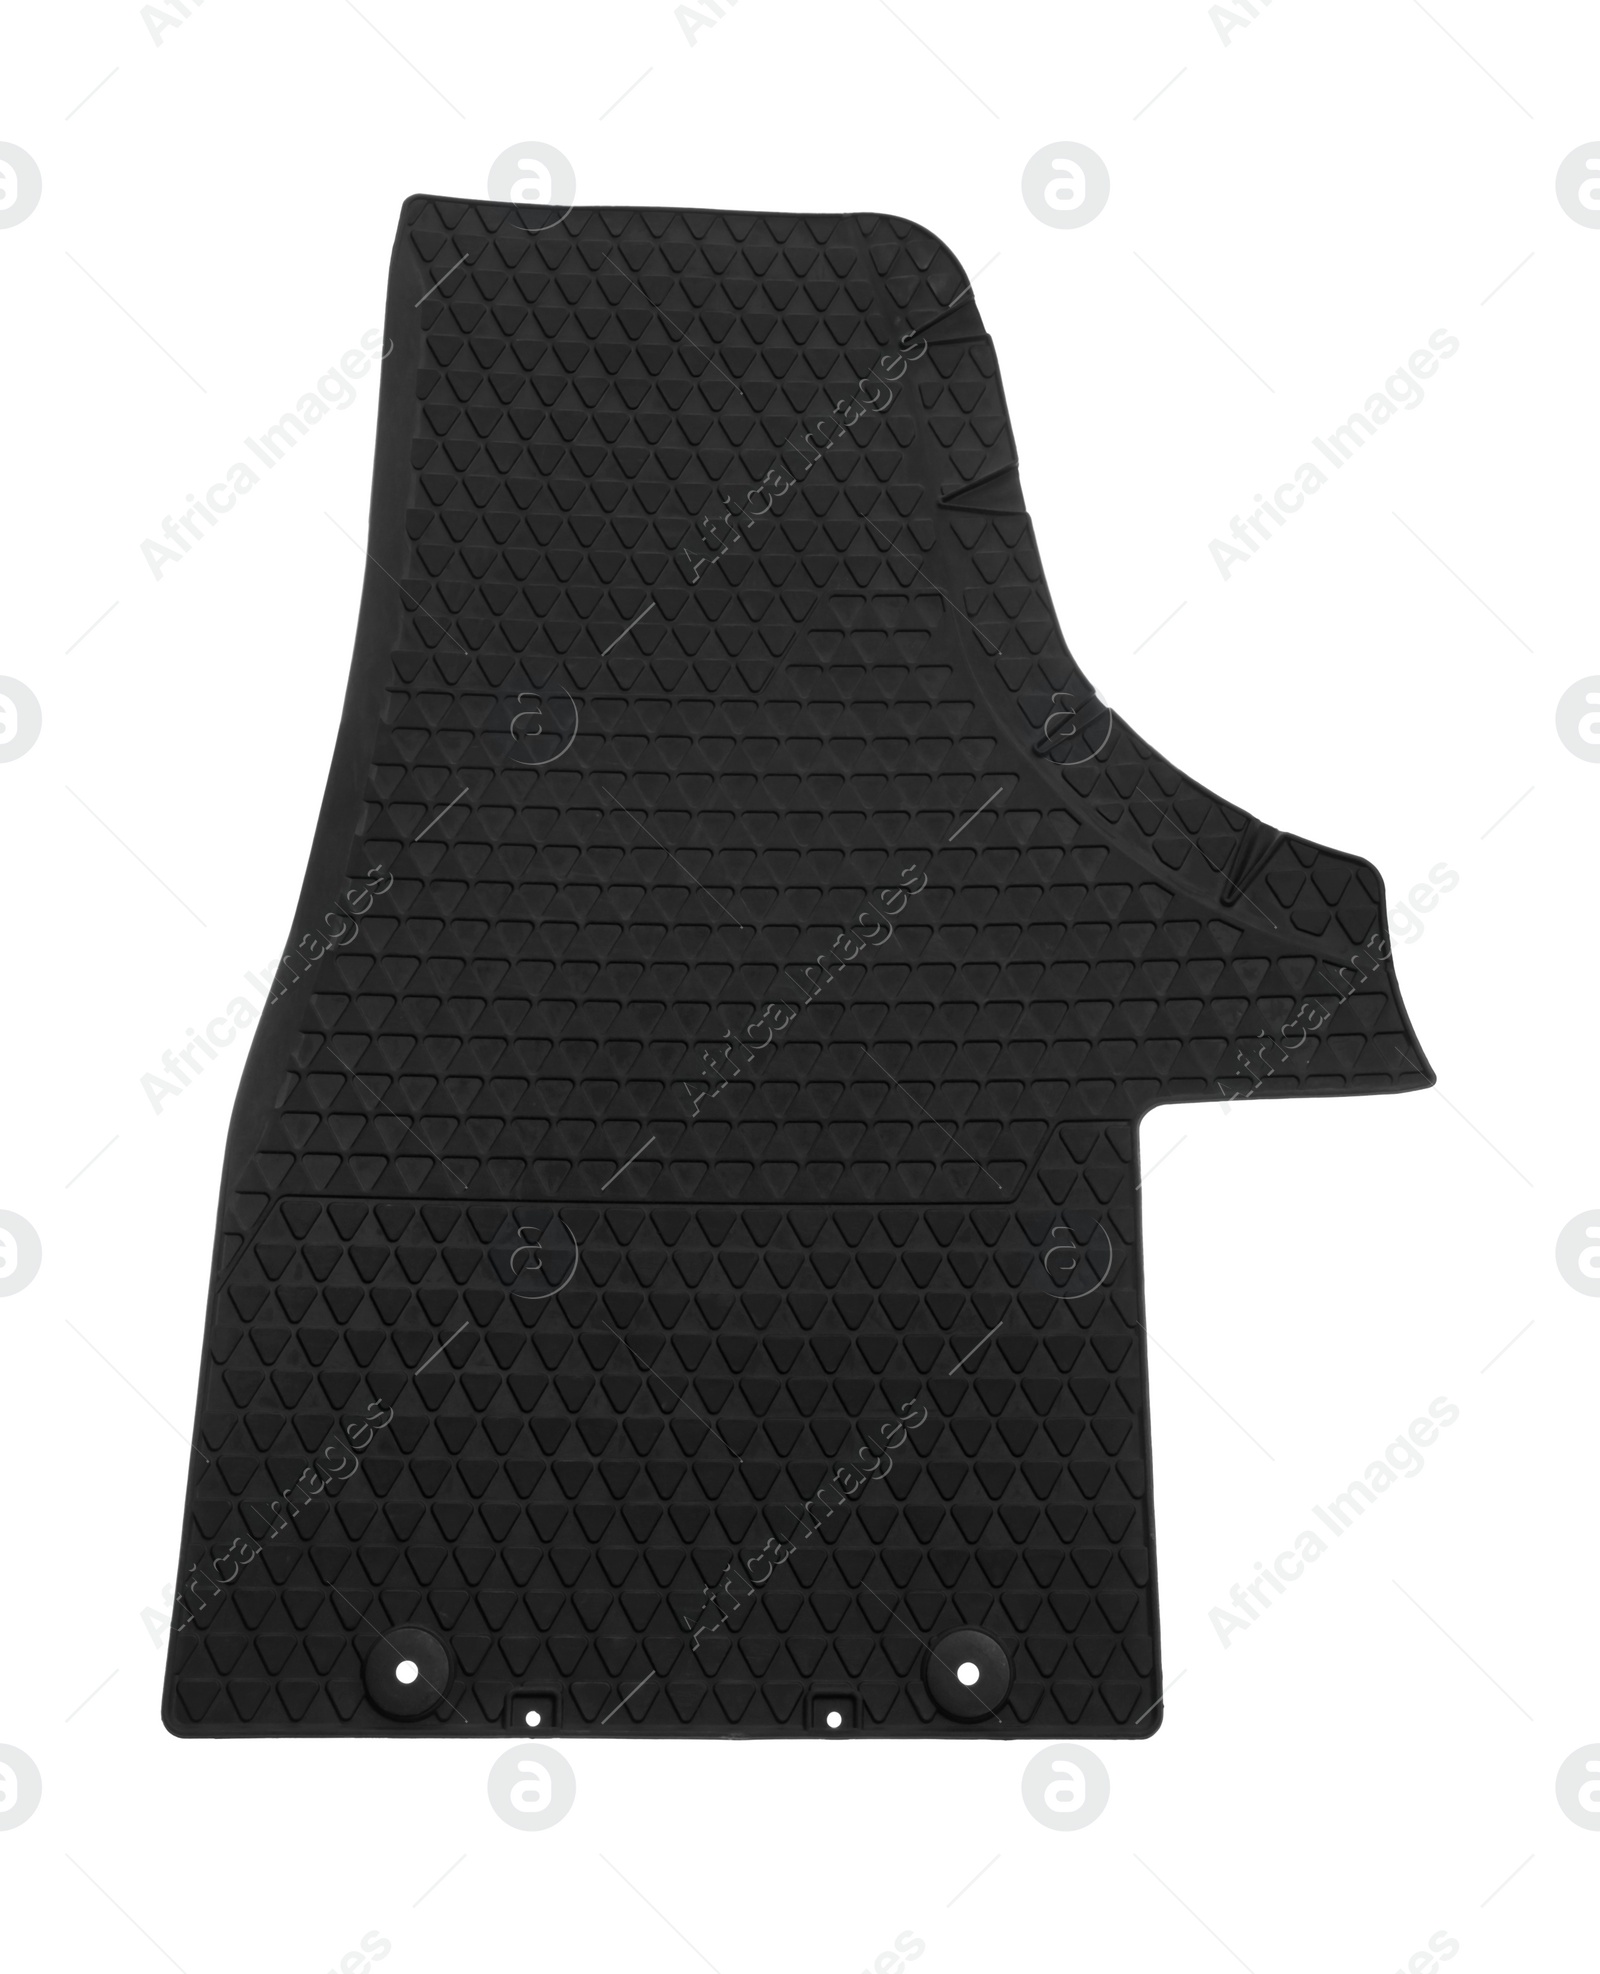 Photo of Black rubber car mat isolated on white